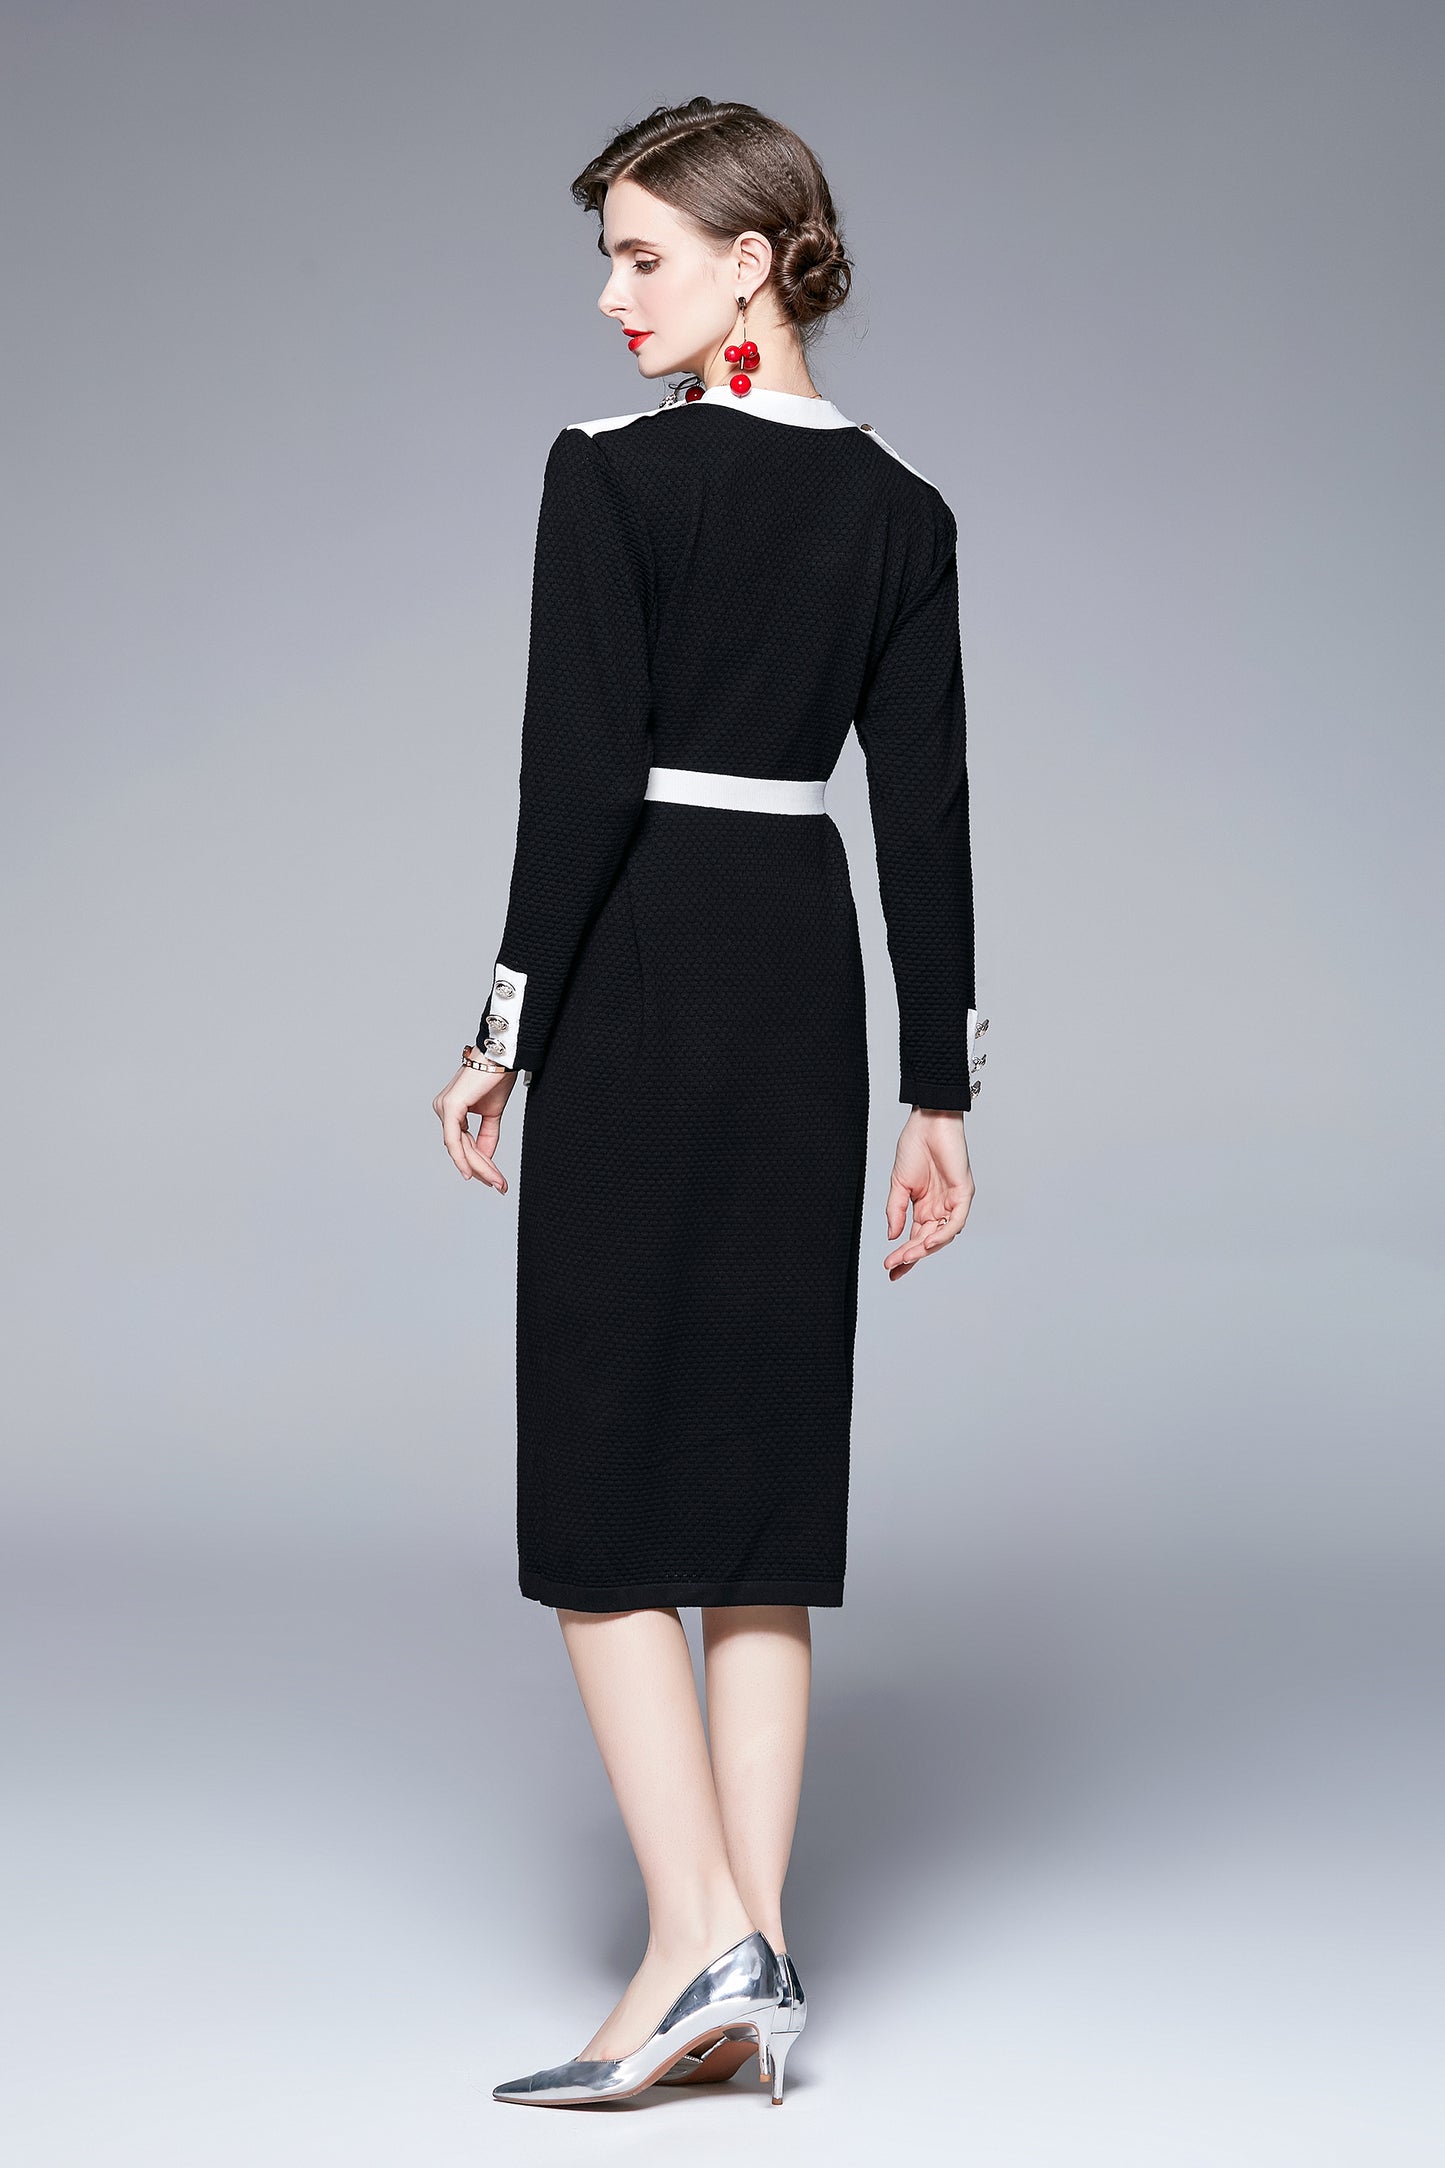 V-neck Front Button and Belt Knitted Dress - LAI MENG FIVE CATS